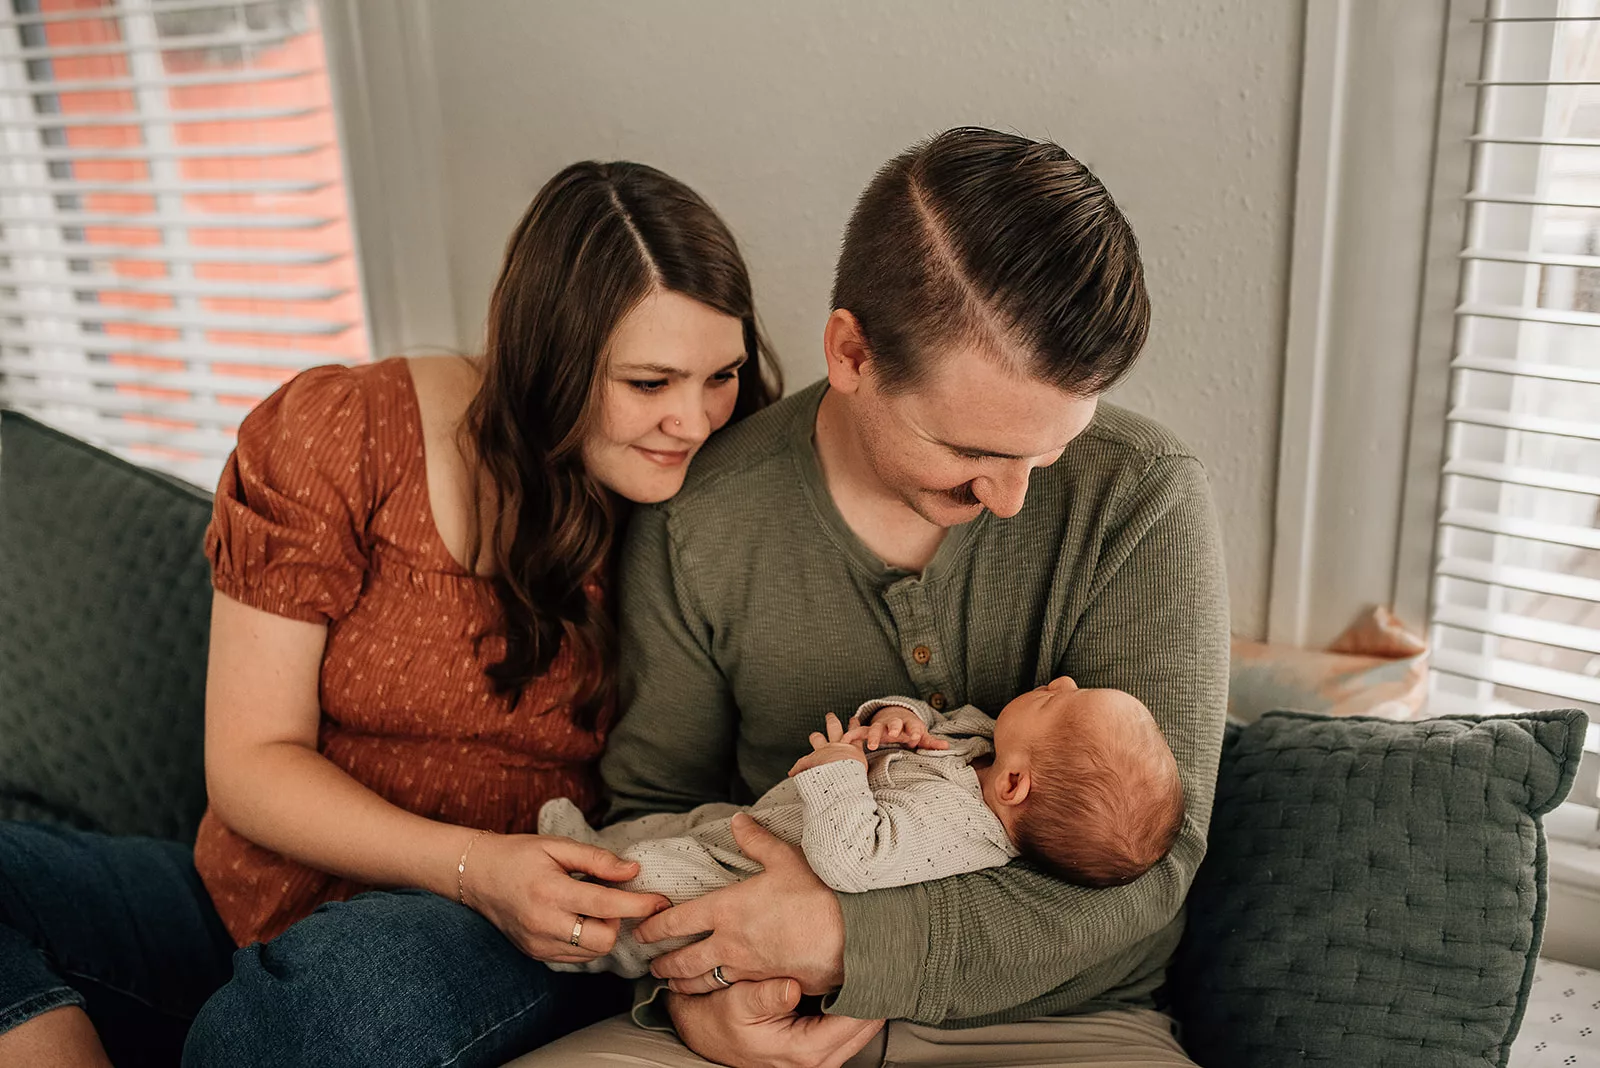 New parents sit together on a green couch looking down at their newborn baby in dad's arms